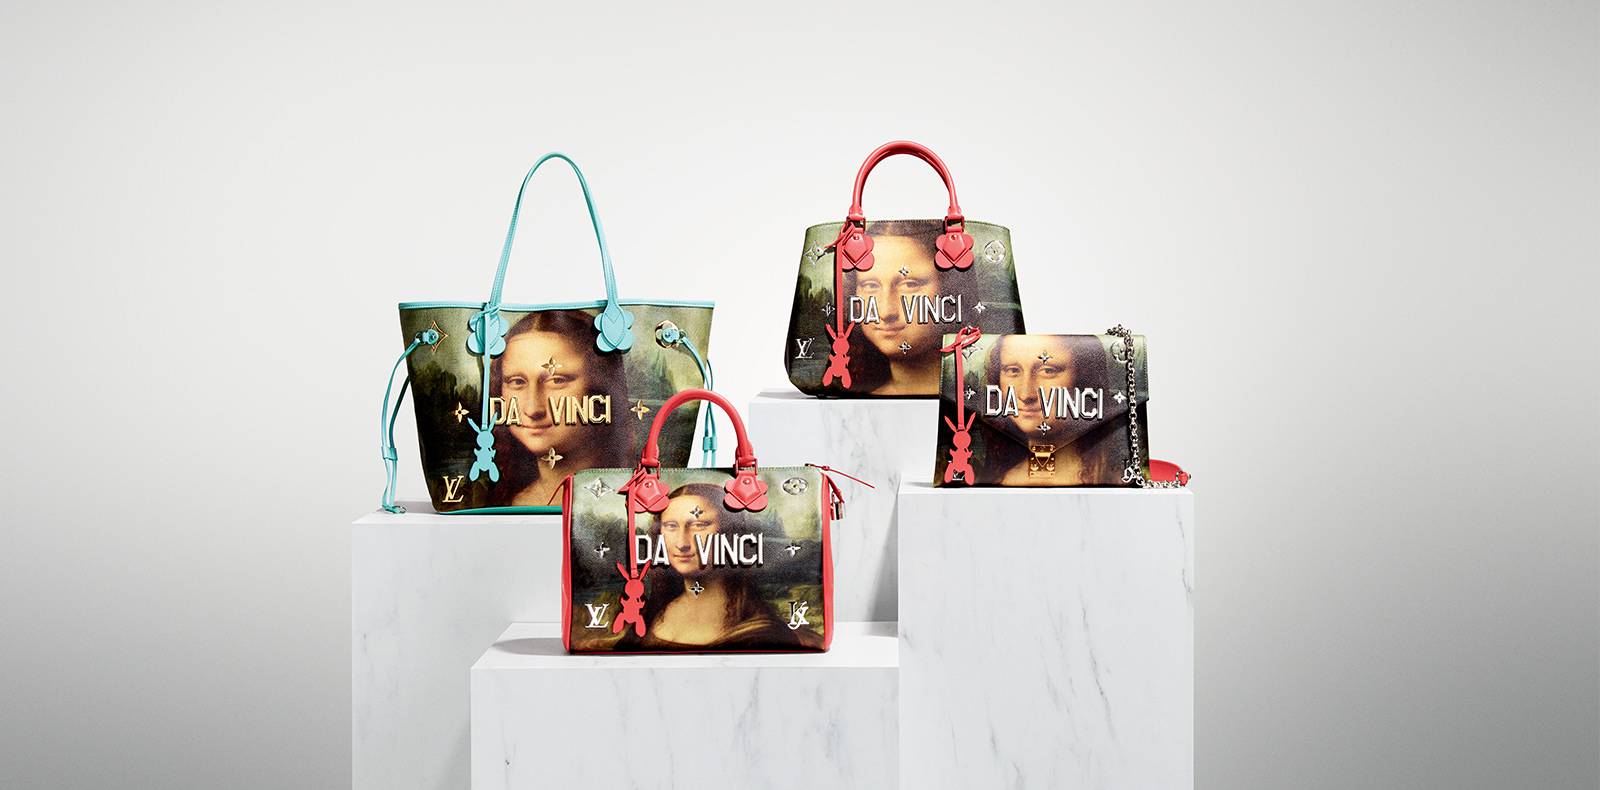 Stars flock to Paris for Louis Vuitton's collab with Jeff Koons